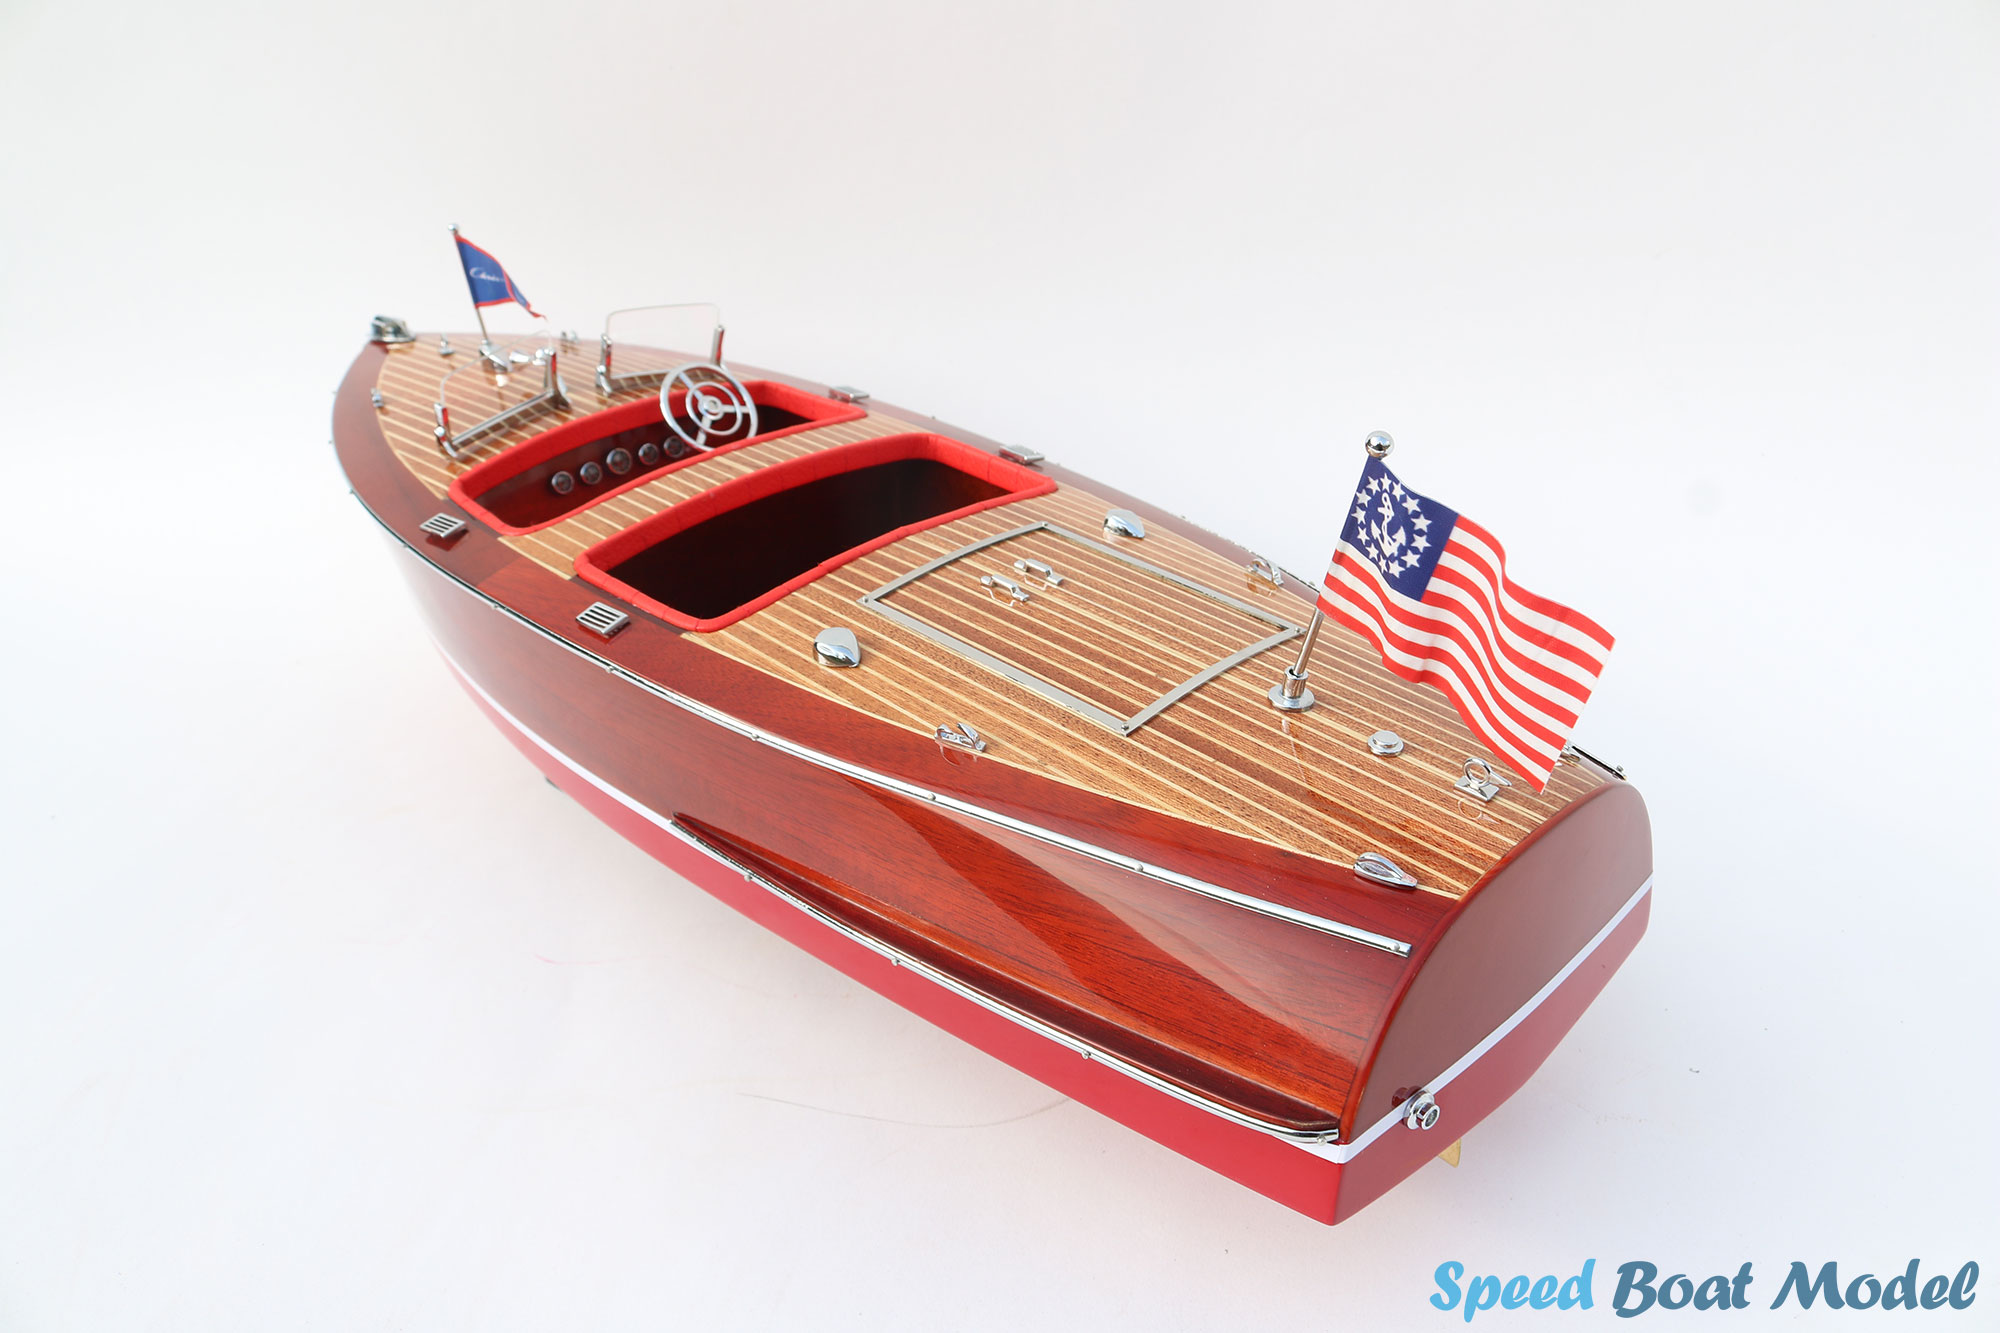 Chris Craft Deluxe Runabout 1942 Speed Boat Model 33.4"